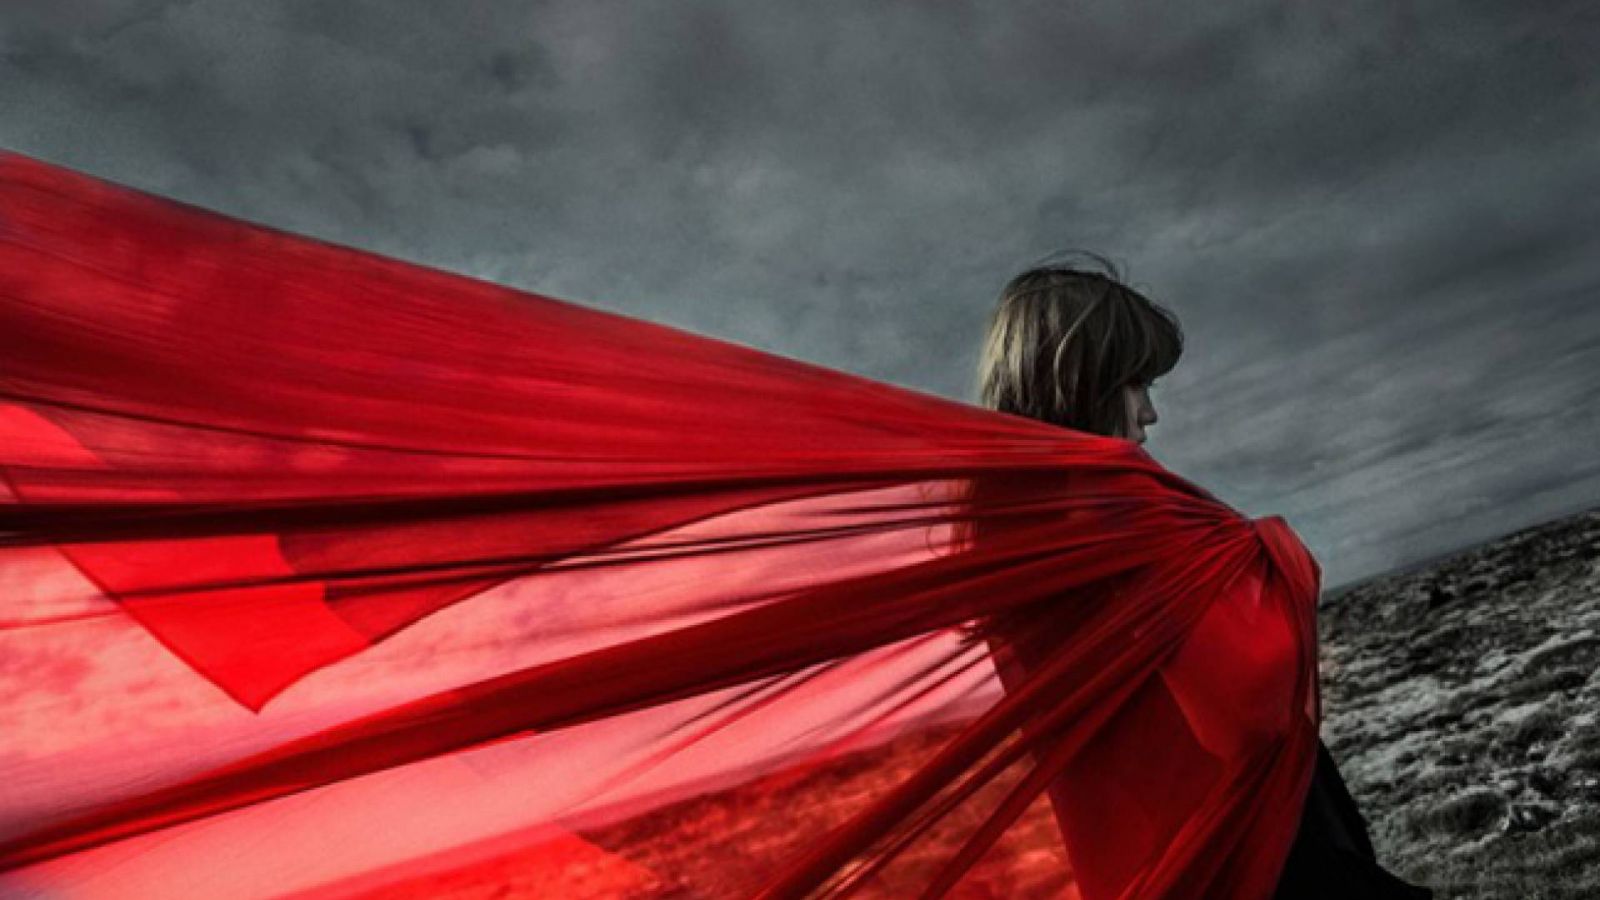 Aimer to Perform at Anime Expo 2015 © SonyMusic. All rights reserved.